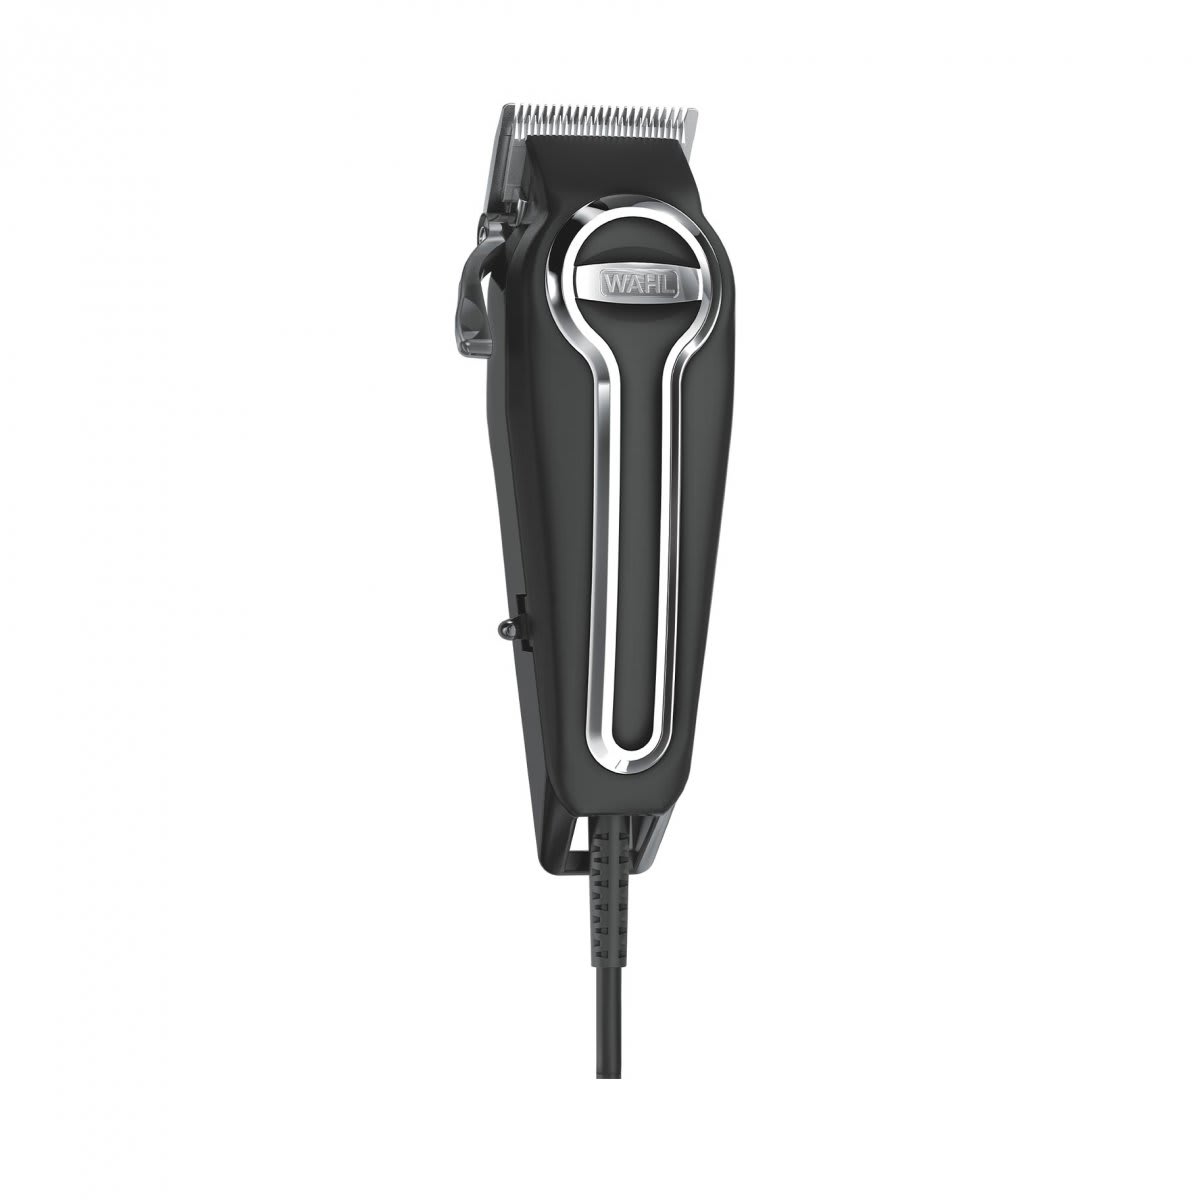 Wahl Elite Pro - High Performance Haircutting Kit